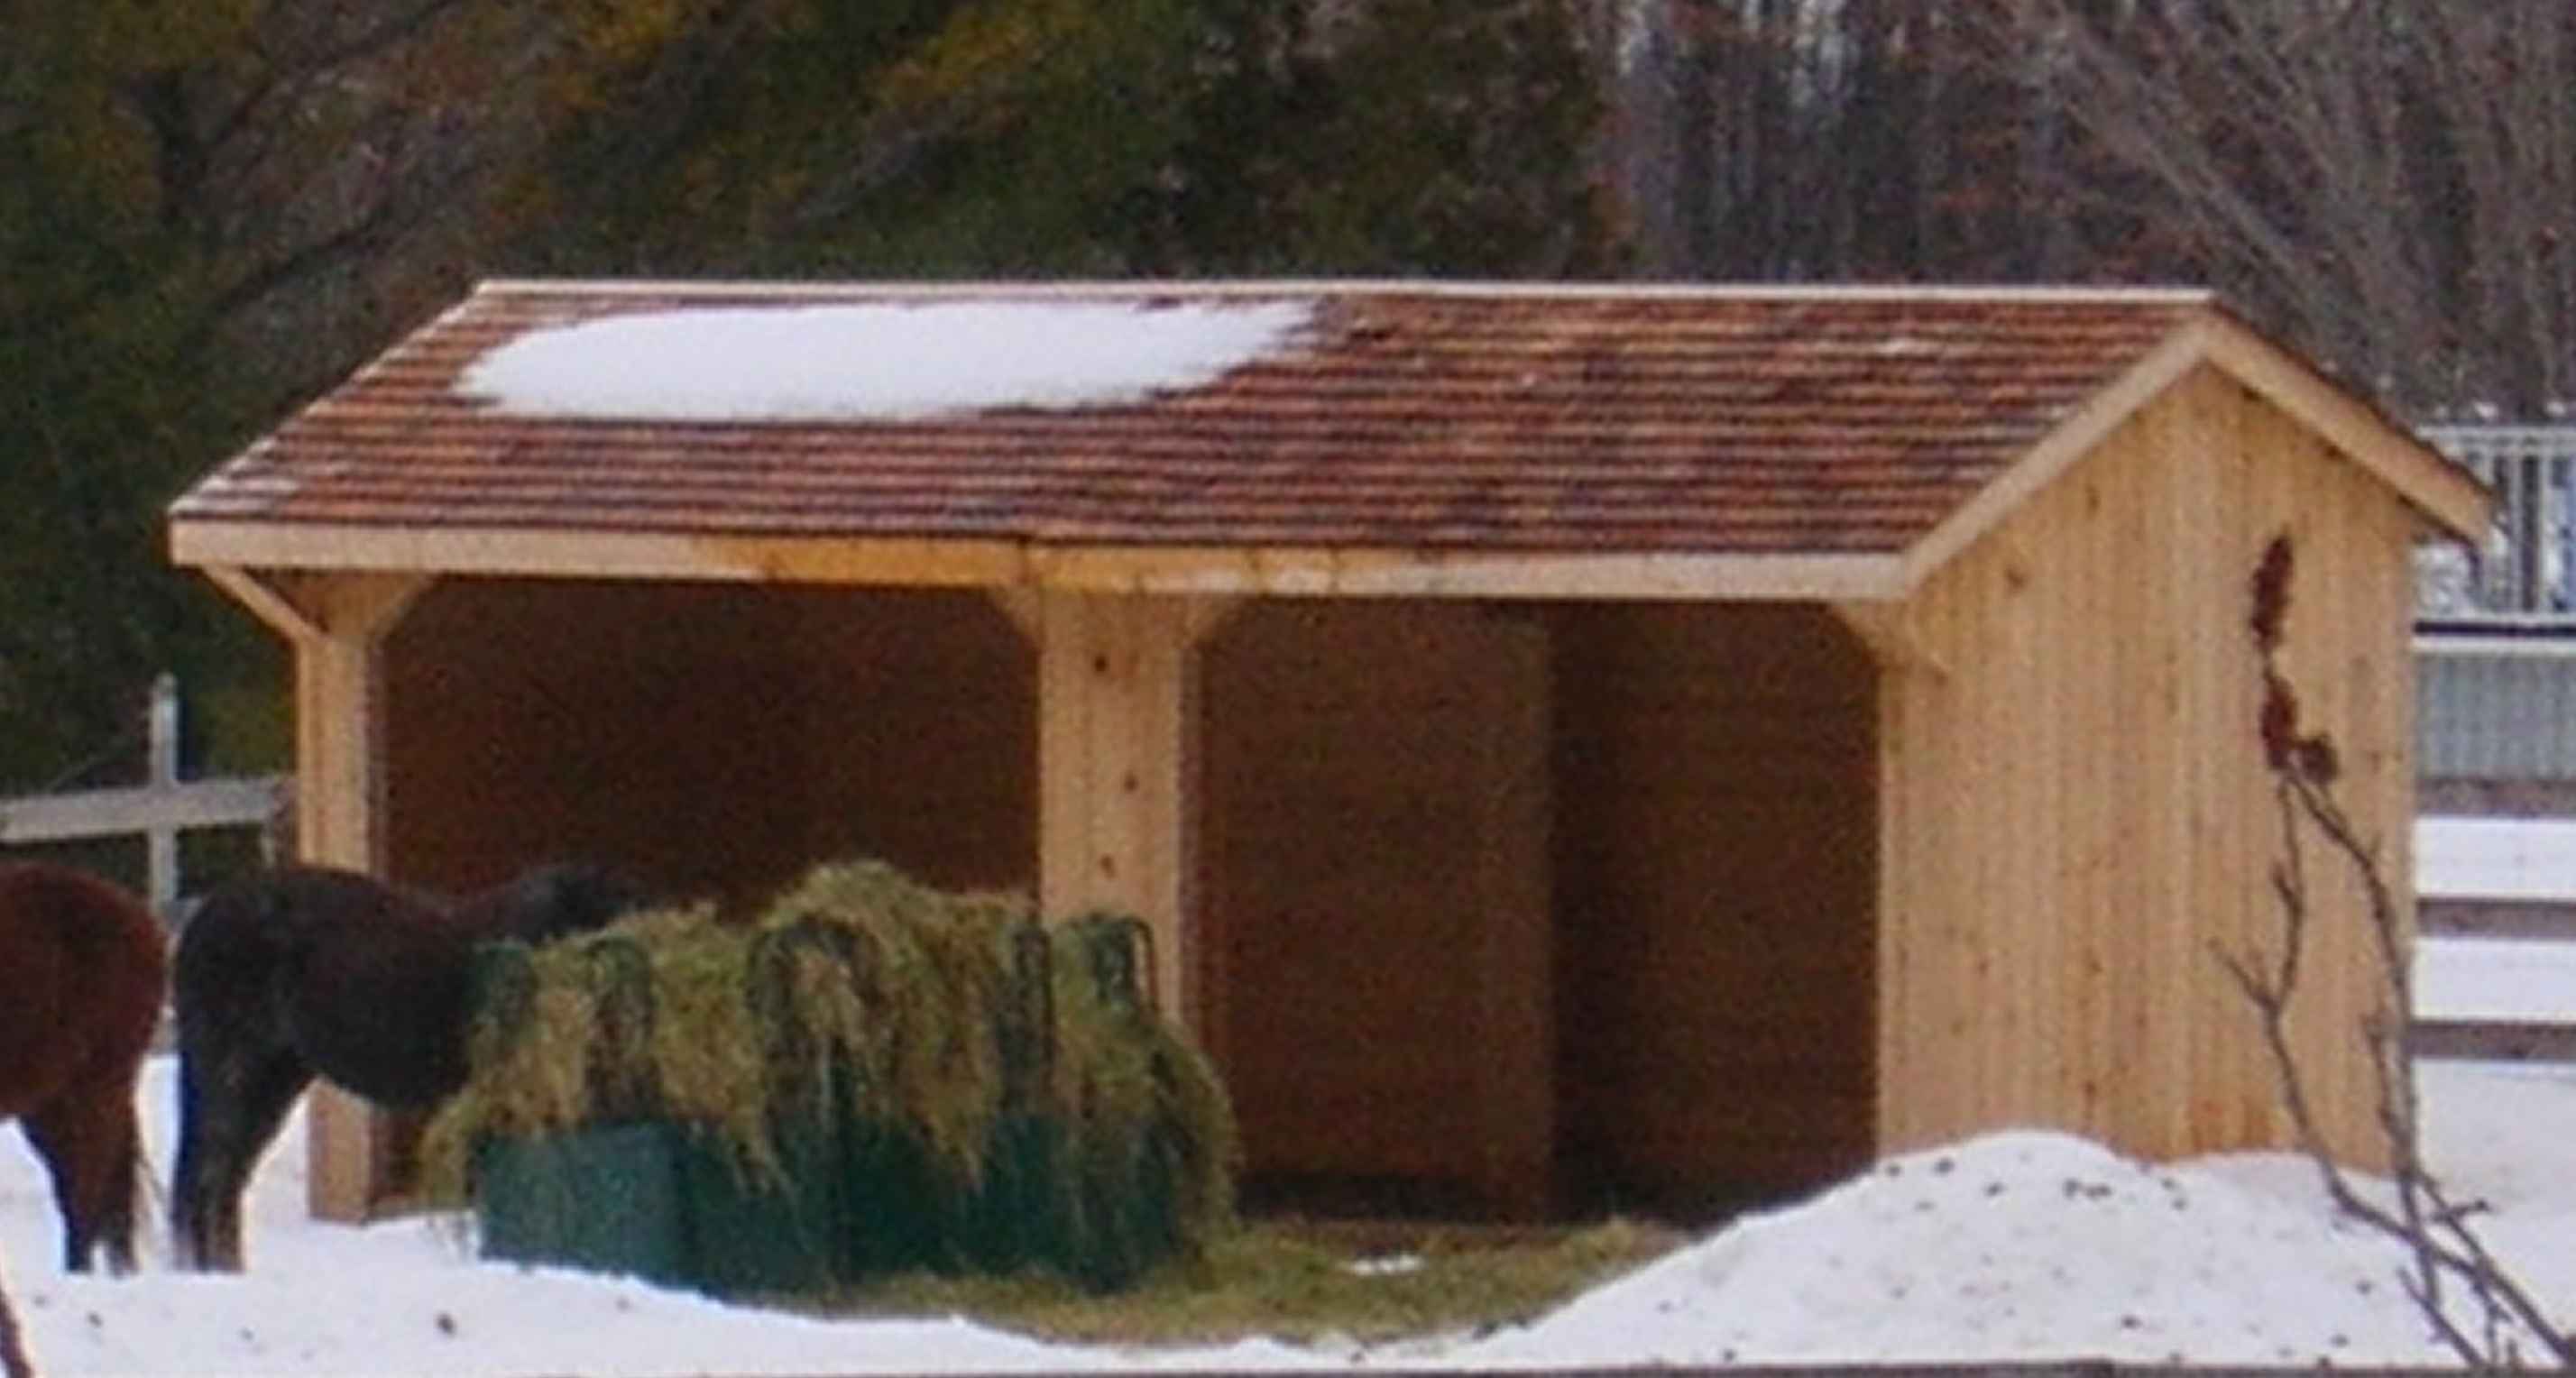 Horse Run-in Shed Plans How to Build DIY Blueprints pdf 